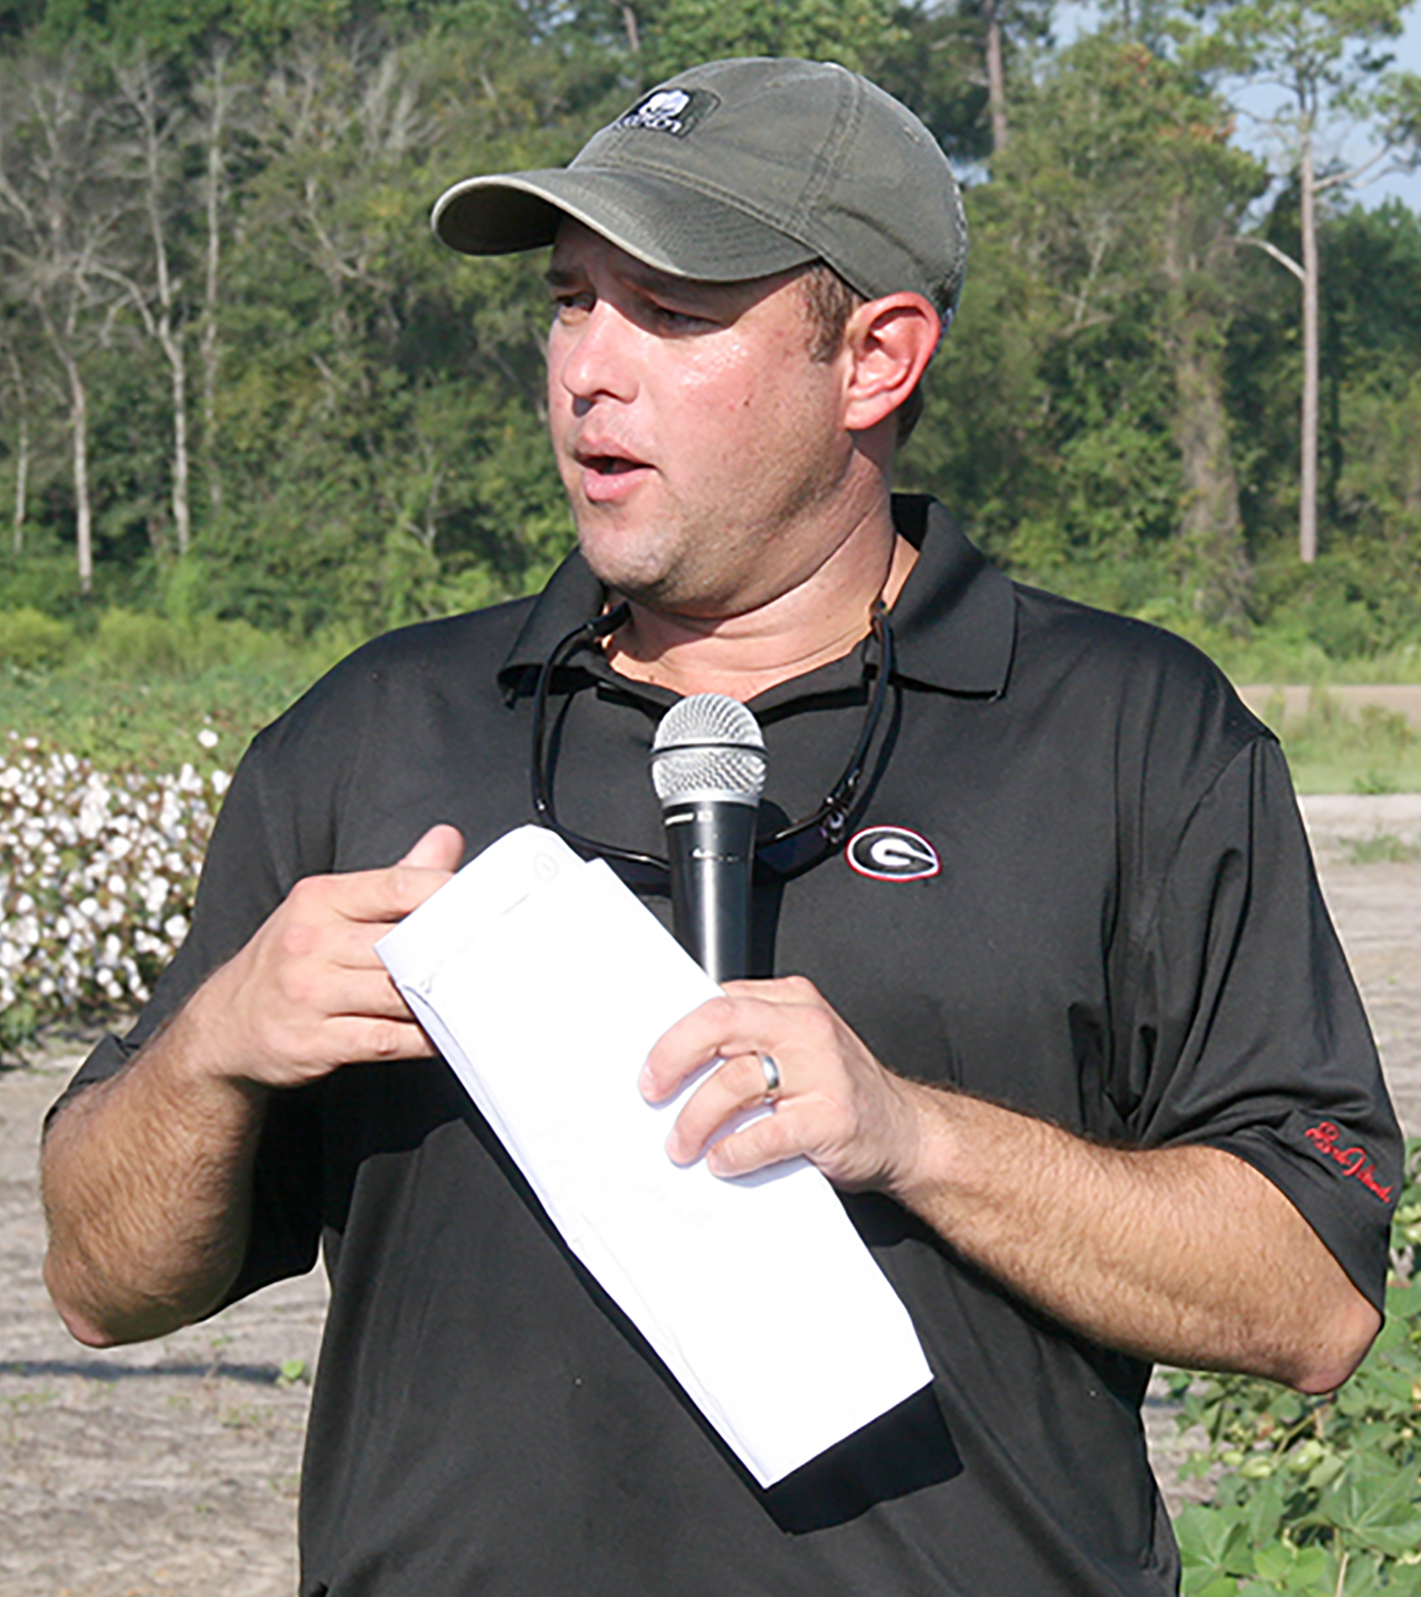 Jared Whitaker speaks during the UGA Cotton and Peanut Field Day in Tifton.